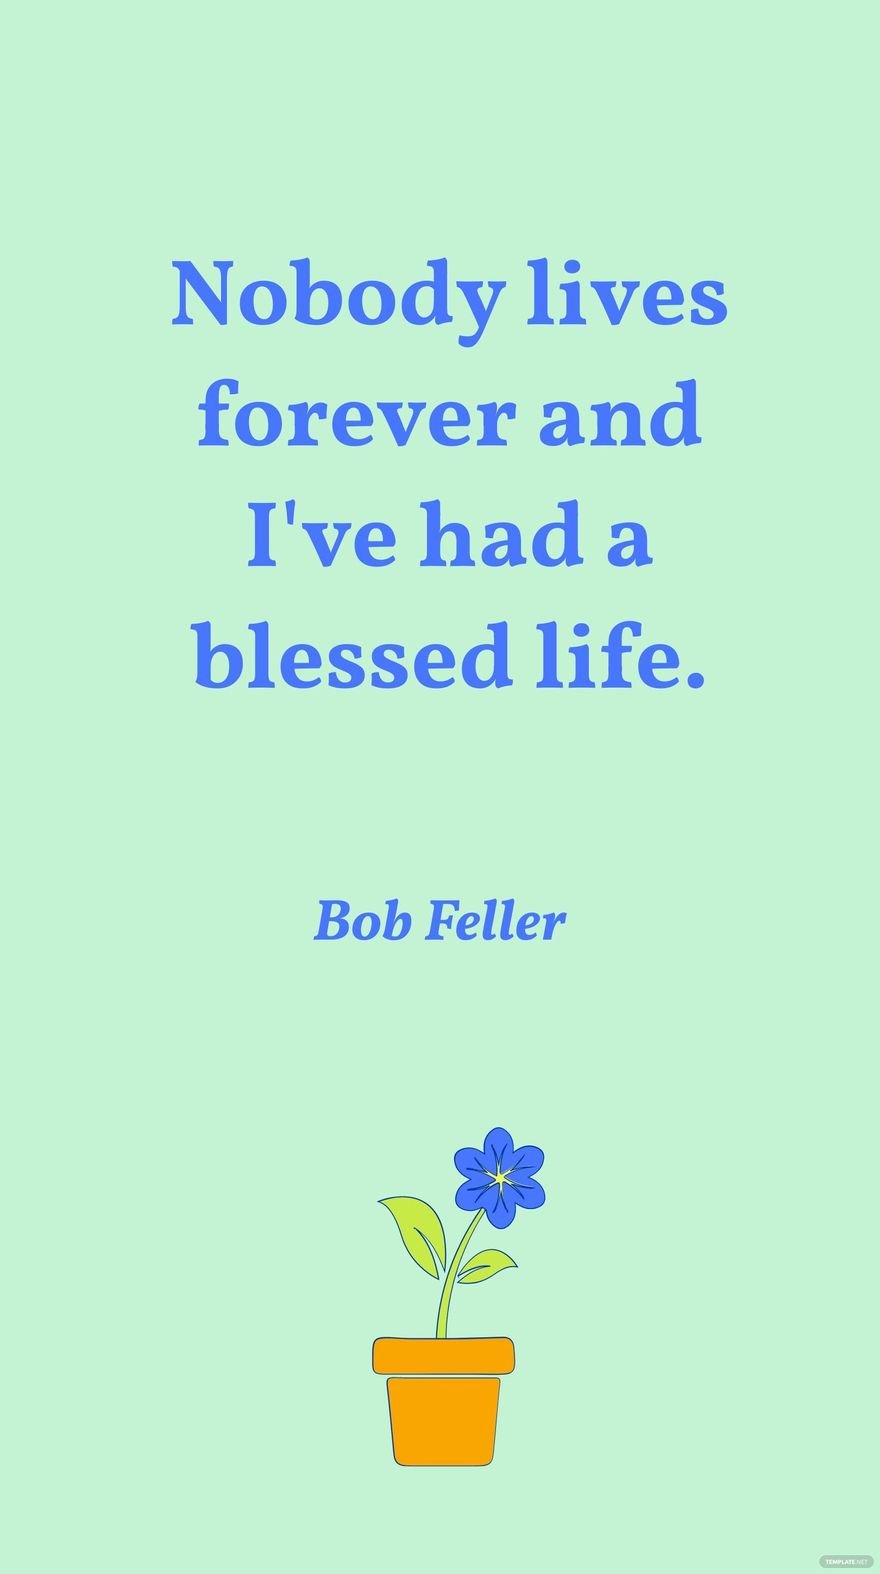 Bob Feller - Nobody lives forever and I've had a blessed life.